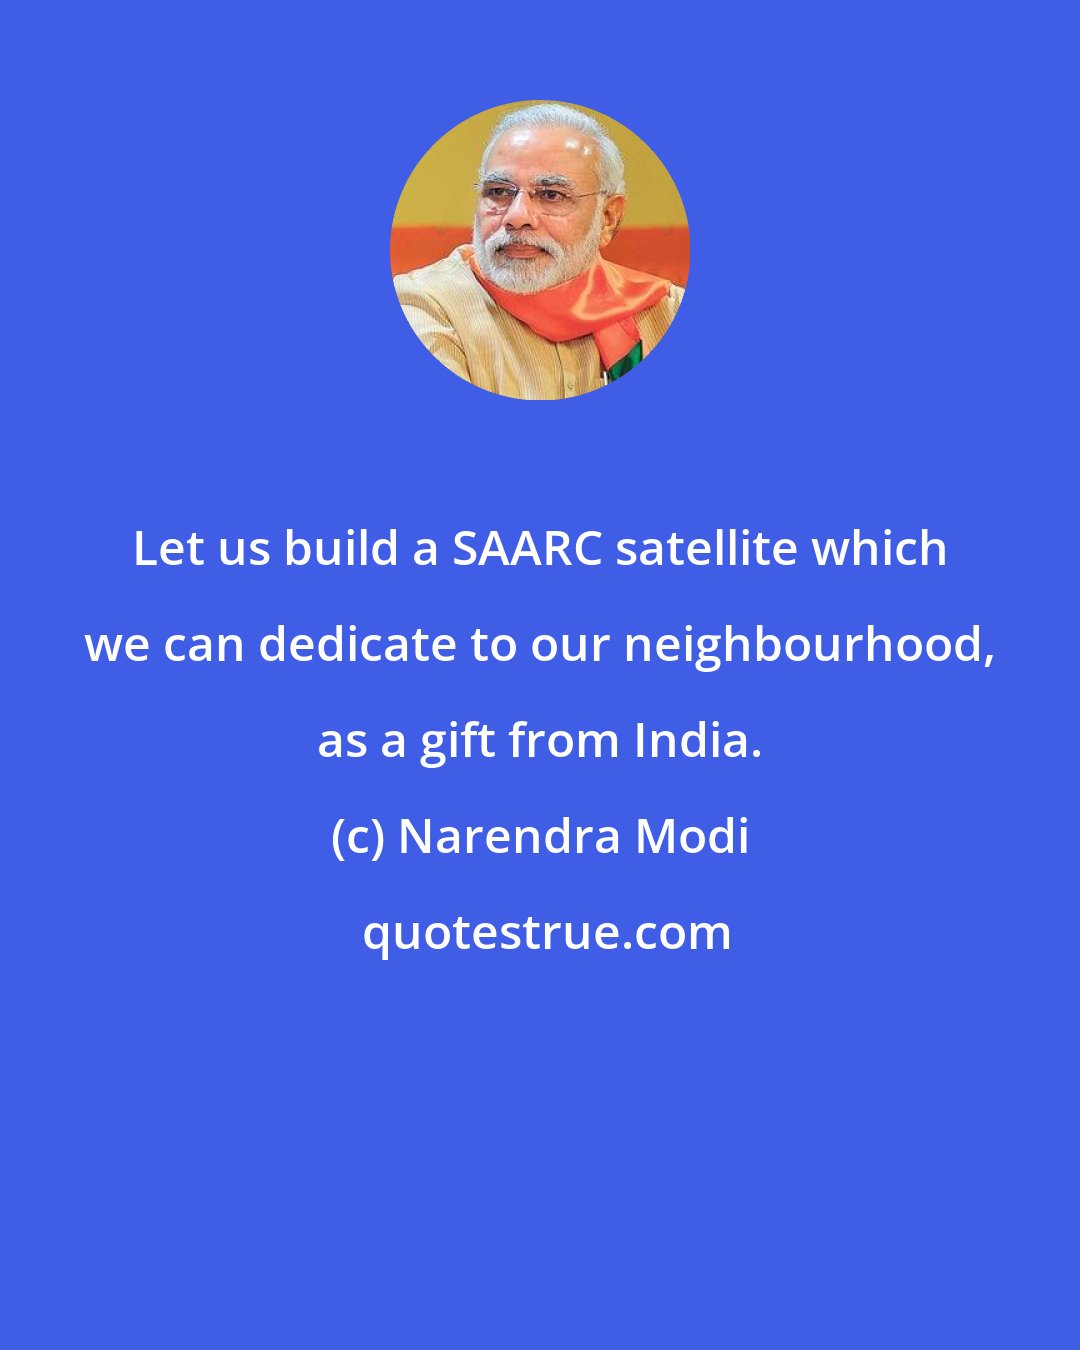 Narendra Modi: Let us build a SAARC satellite which we can dedicate to our neighbourhood, as a gift from India.